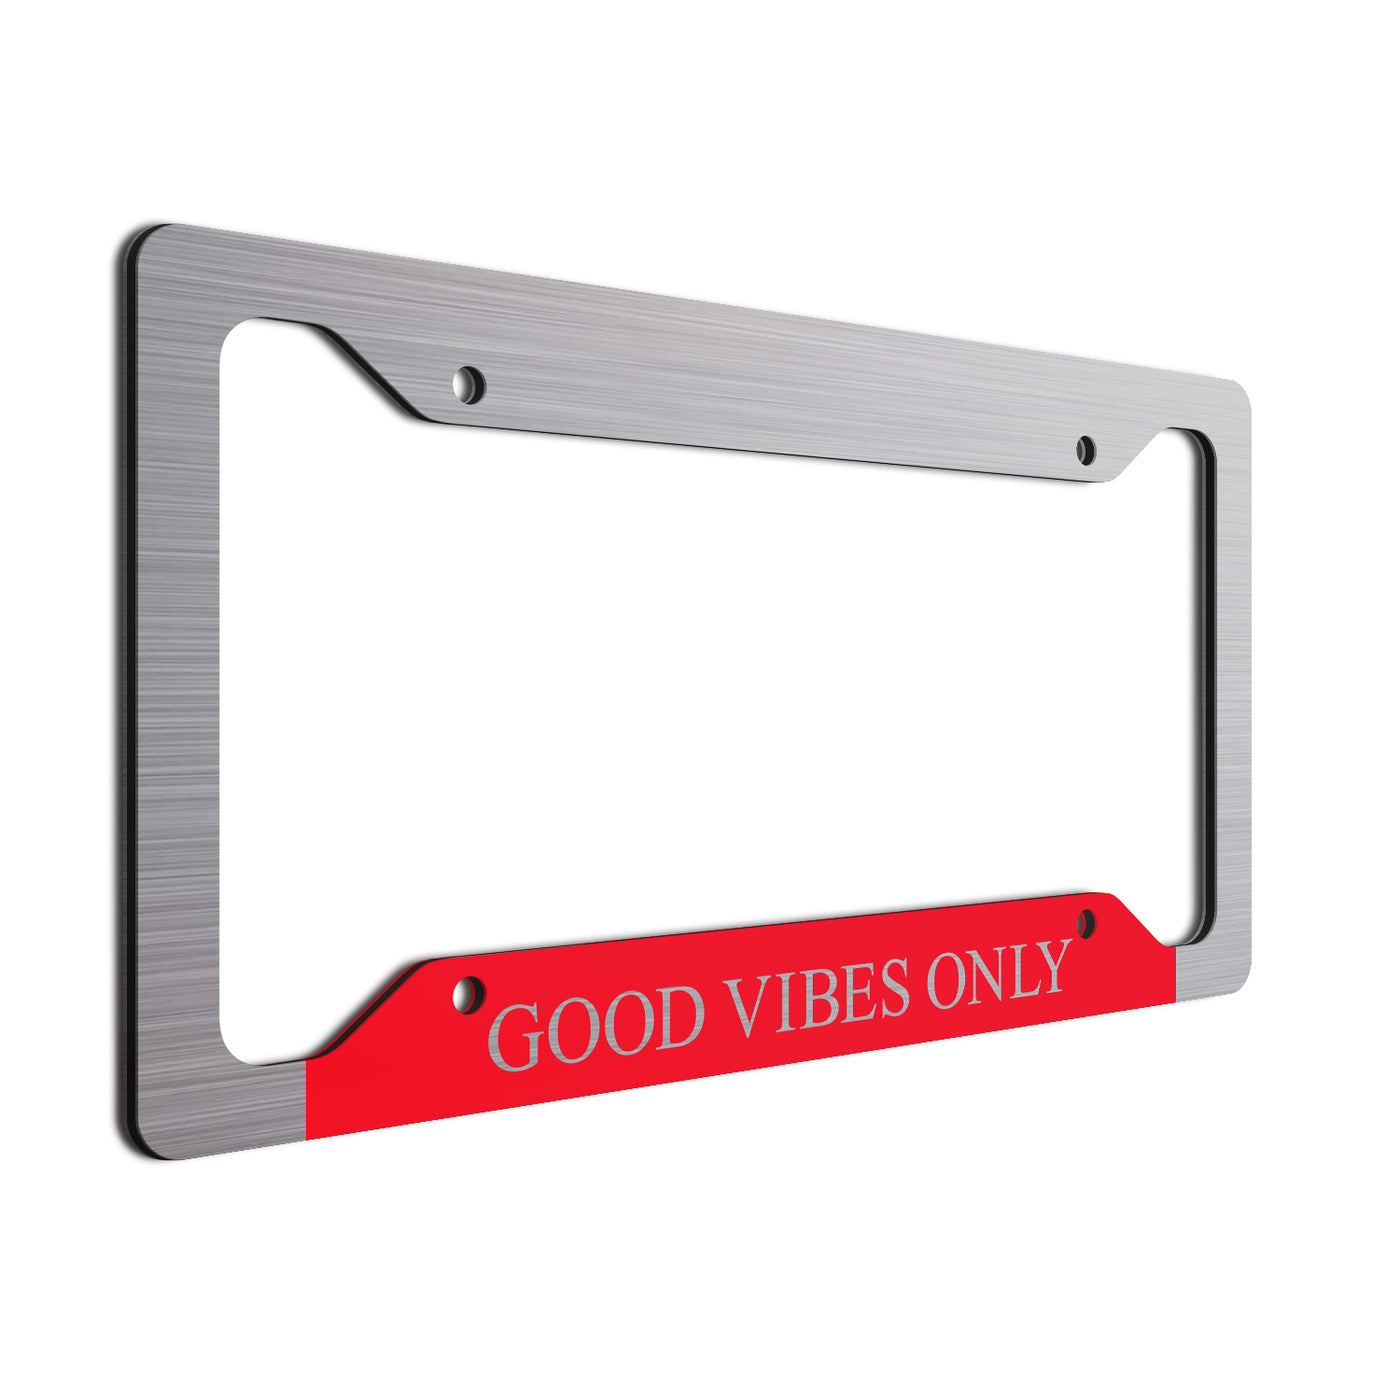 Good Vibes Only| License Plate Frame| Fun Vanity Plate Frame